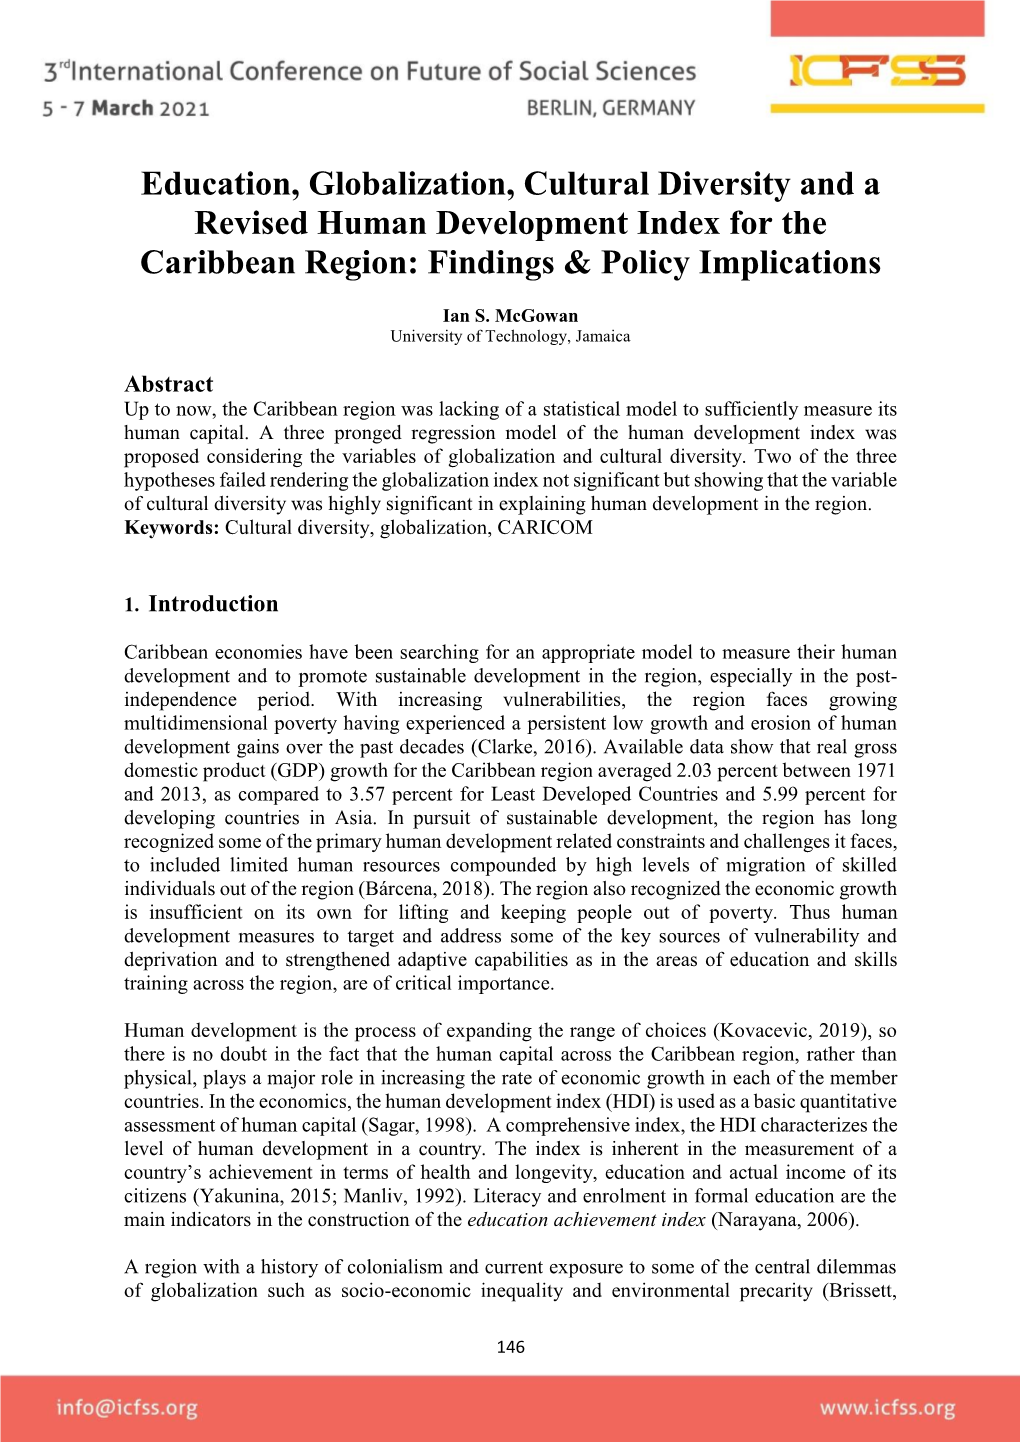 Education, Globalization, Cultural Diversity and a Revised Human Development Index for the Caribbean Region: Findings & Policy Implications